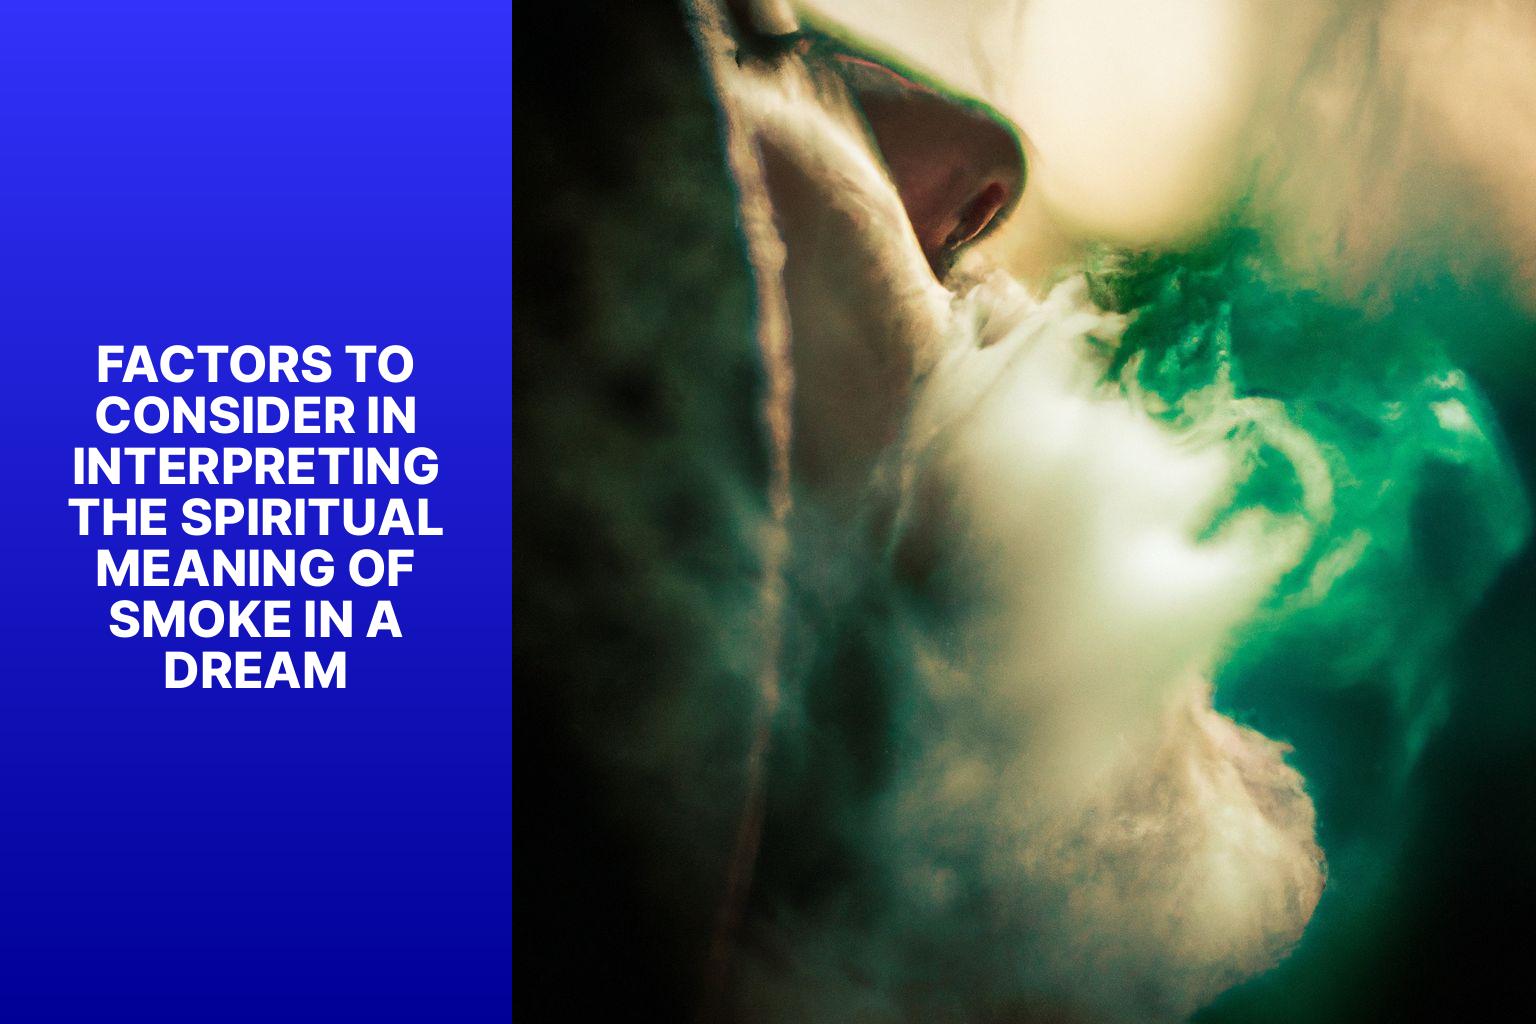 Factors to Consider in Interpreting the Spiritual Meaning of Smoke in a Dream - spiritual meaning of smoke in a dream 